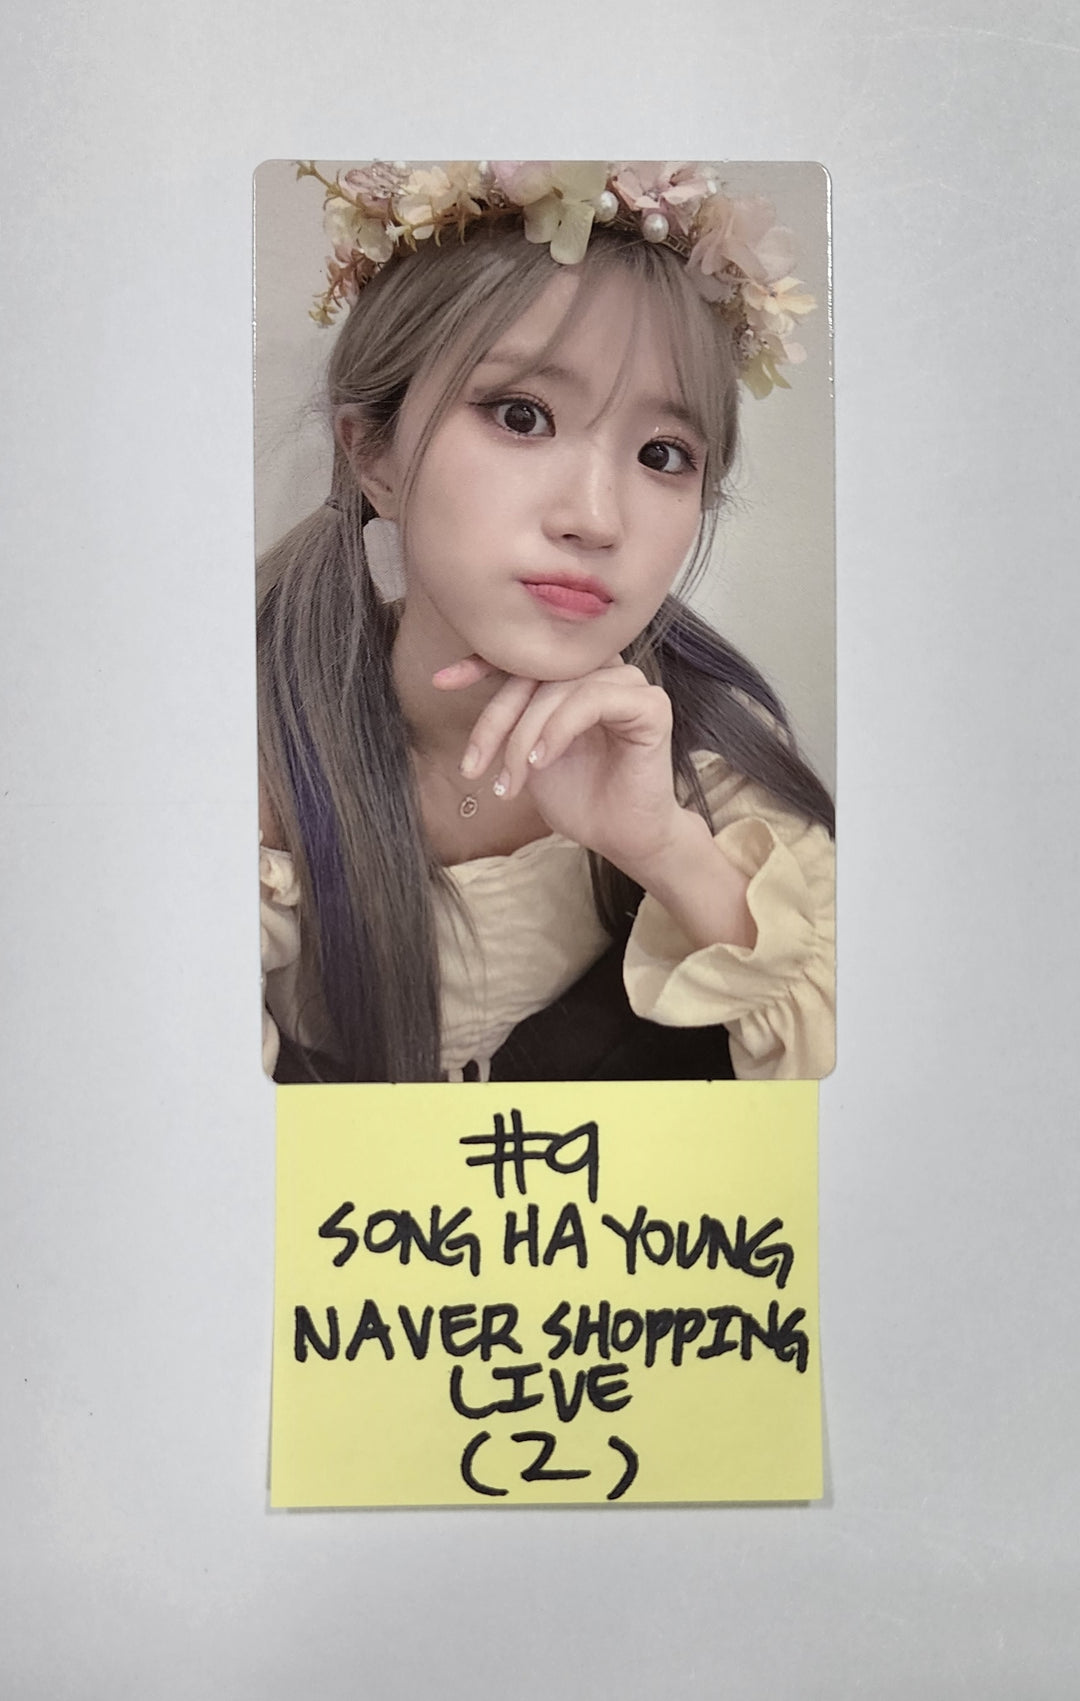 Fromis_9 "from our Memento Box" - Naver Shopping Live Weverse Shop Pre-Order Benefit Photocard / Hologram Photocard